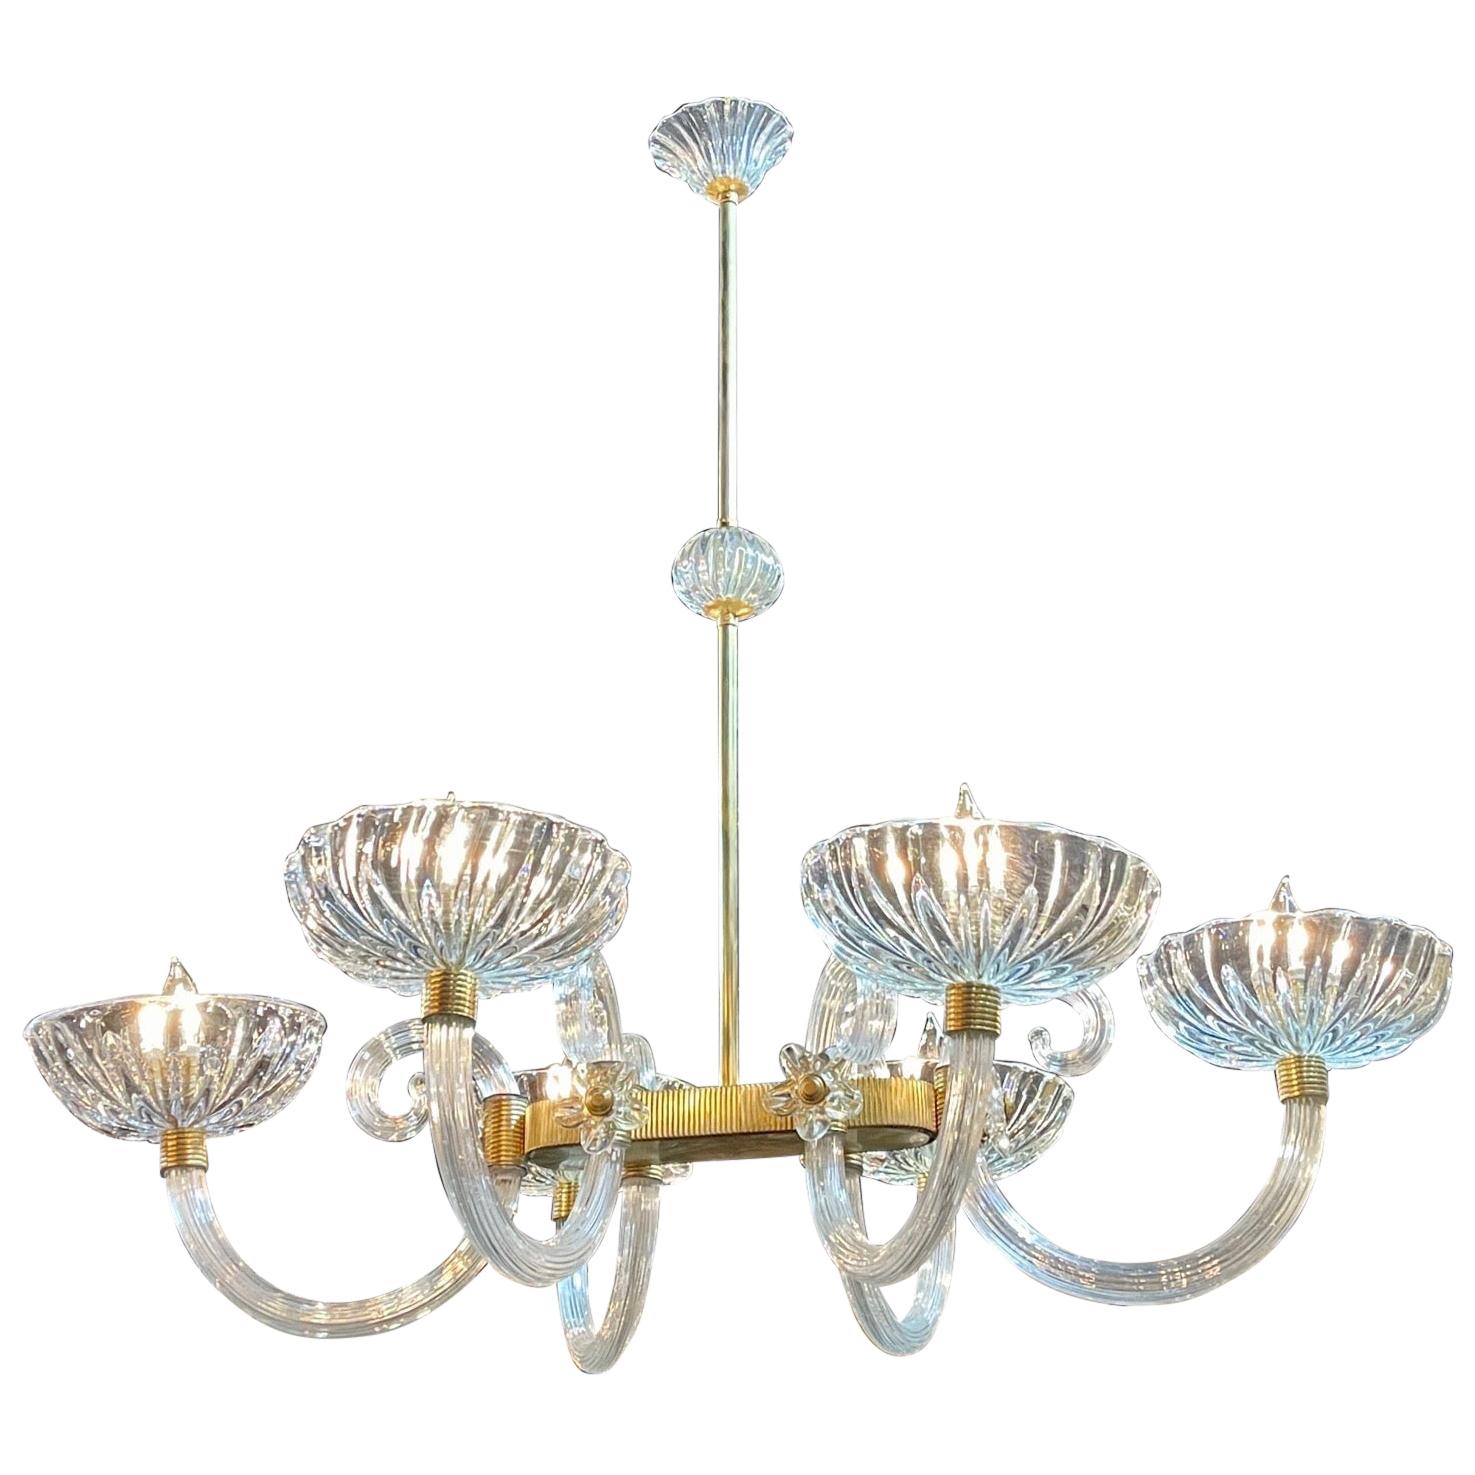 Vintage Italian Glass and Brass 6 Light Chandelier by Barovier and Toso